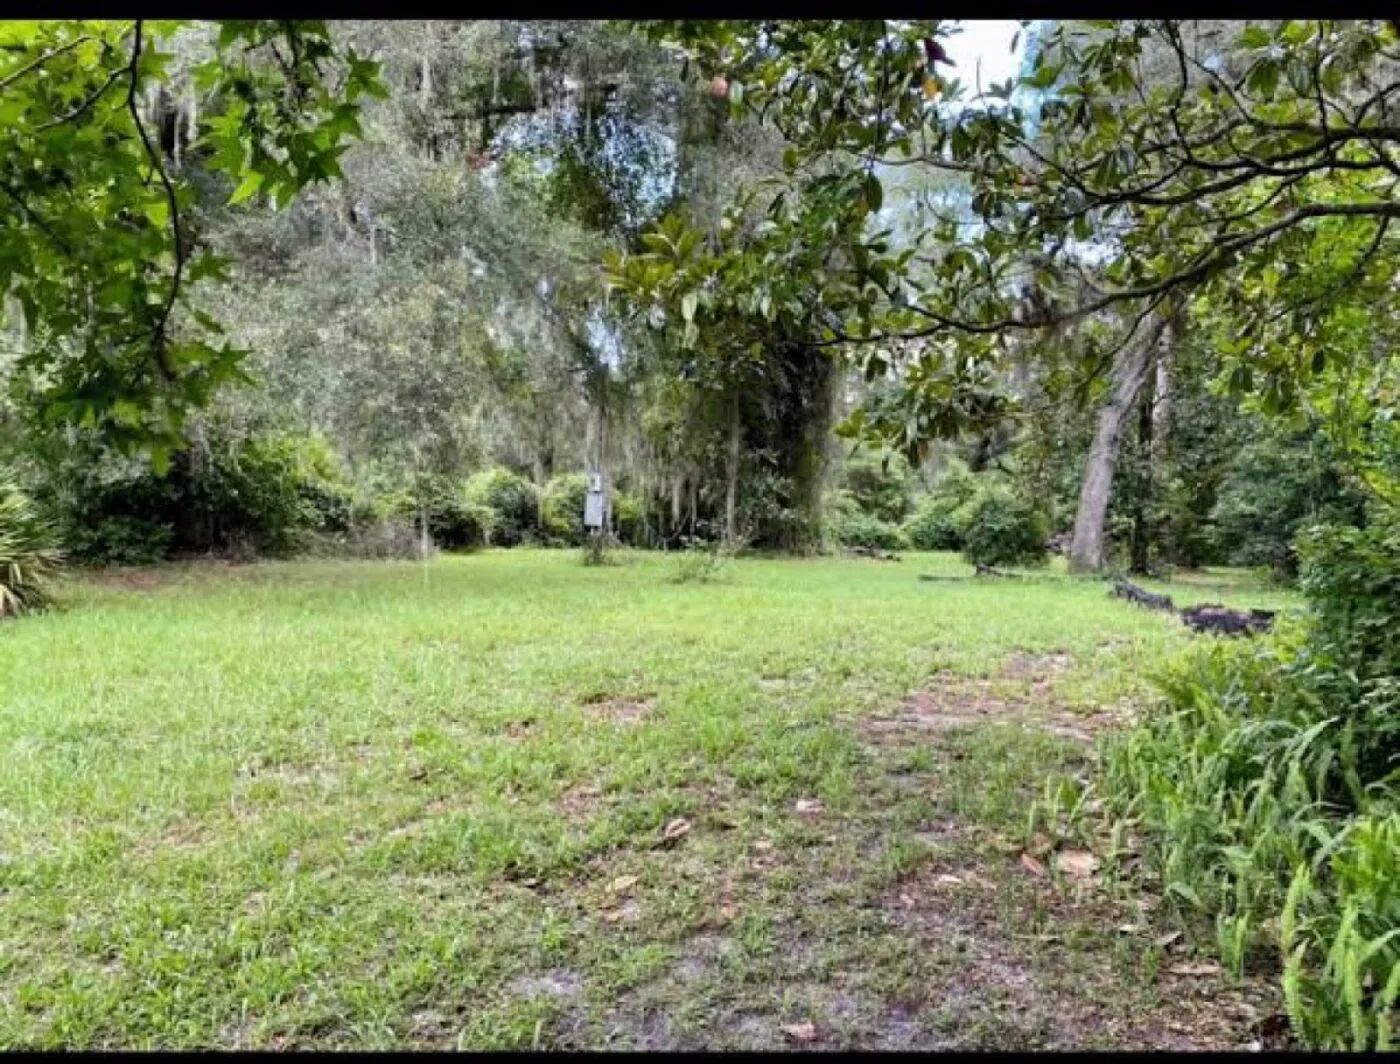 Land For Sale Real Estate-Land for sale in Karen Hardy 1/2 Acre @30M Ready Title Deed QUICK SALE Exclusive half acre 0.5🔥 1